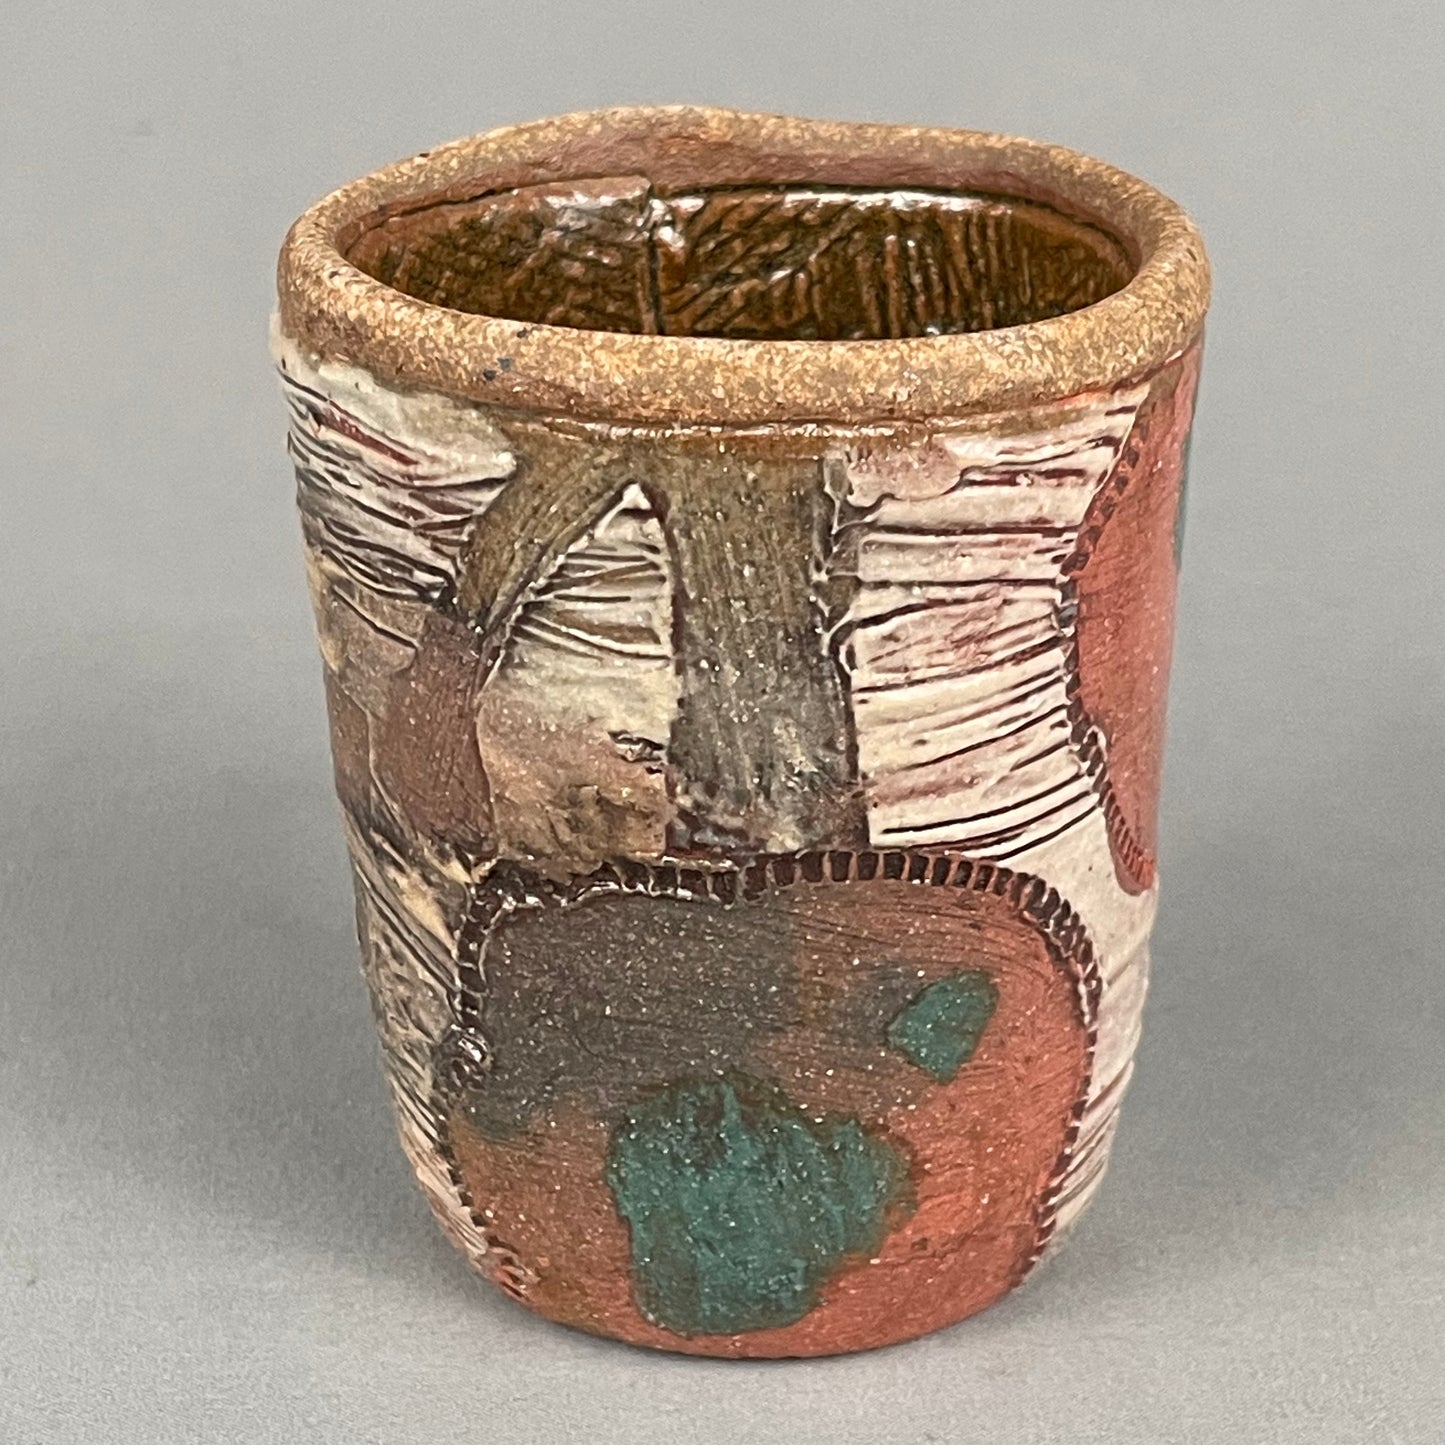 Rustic Cup #3